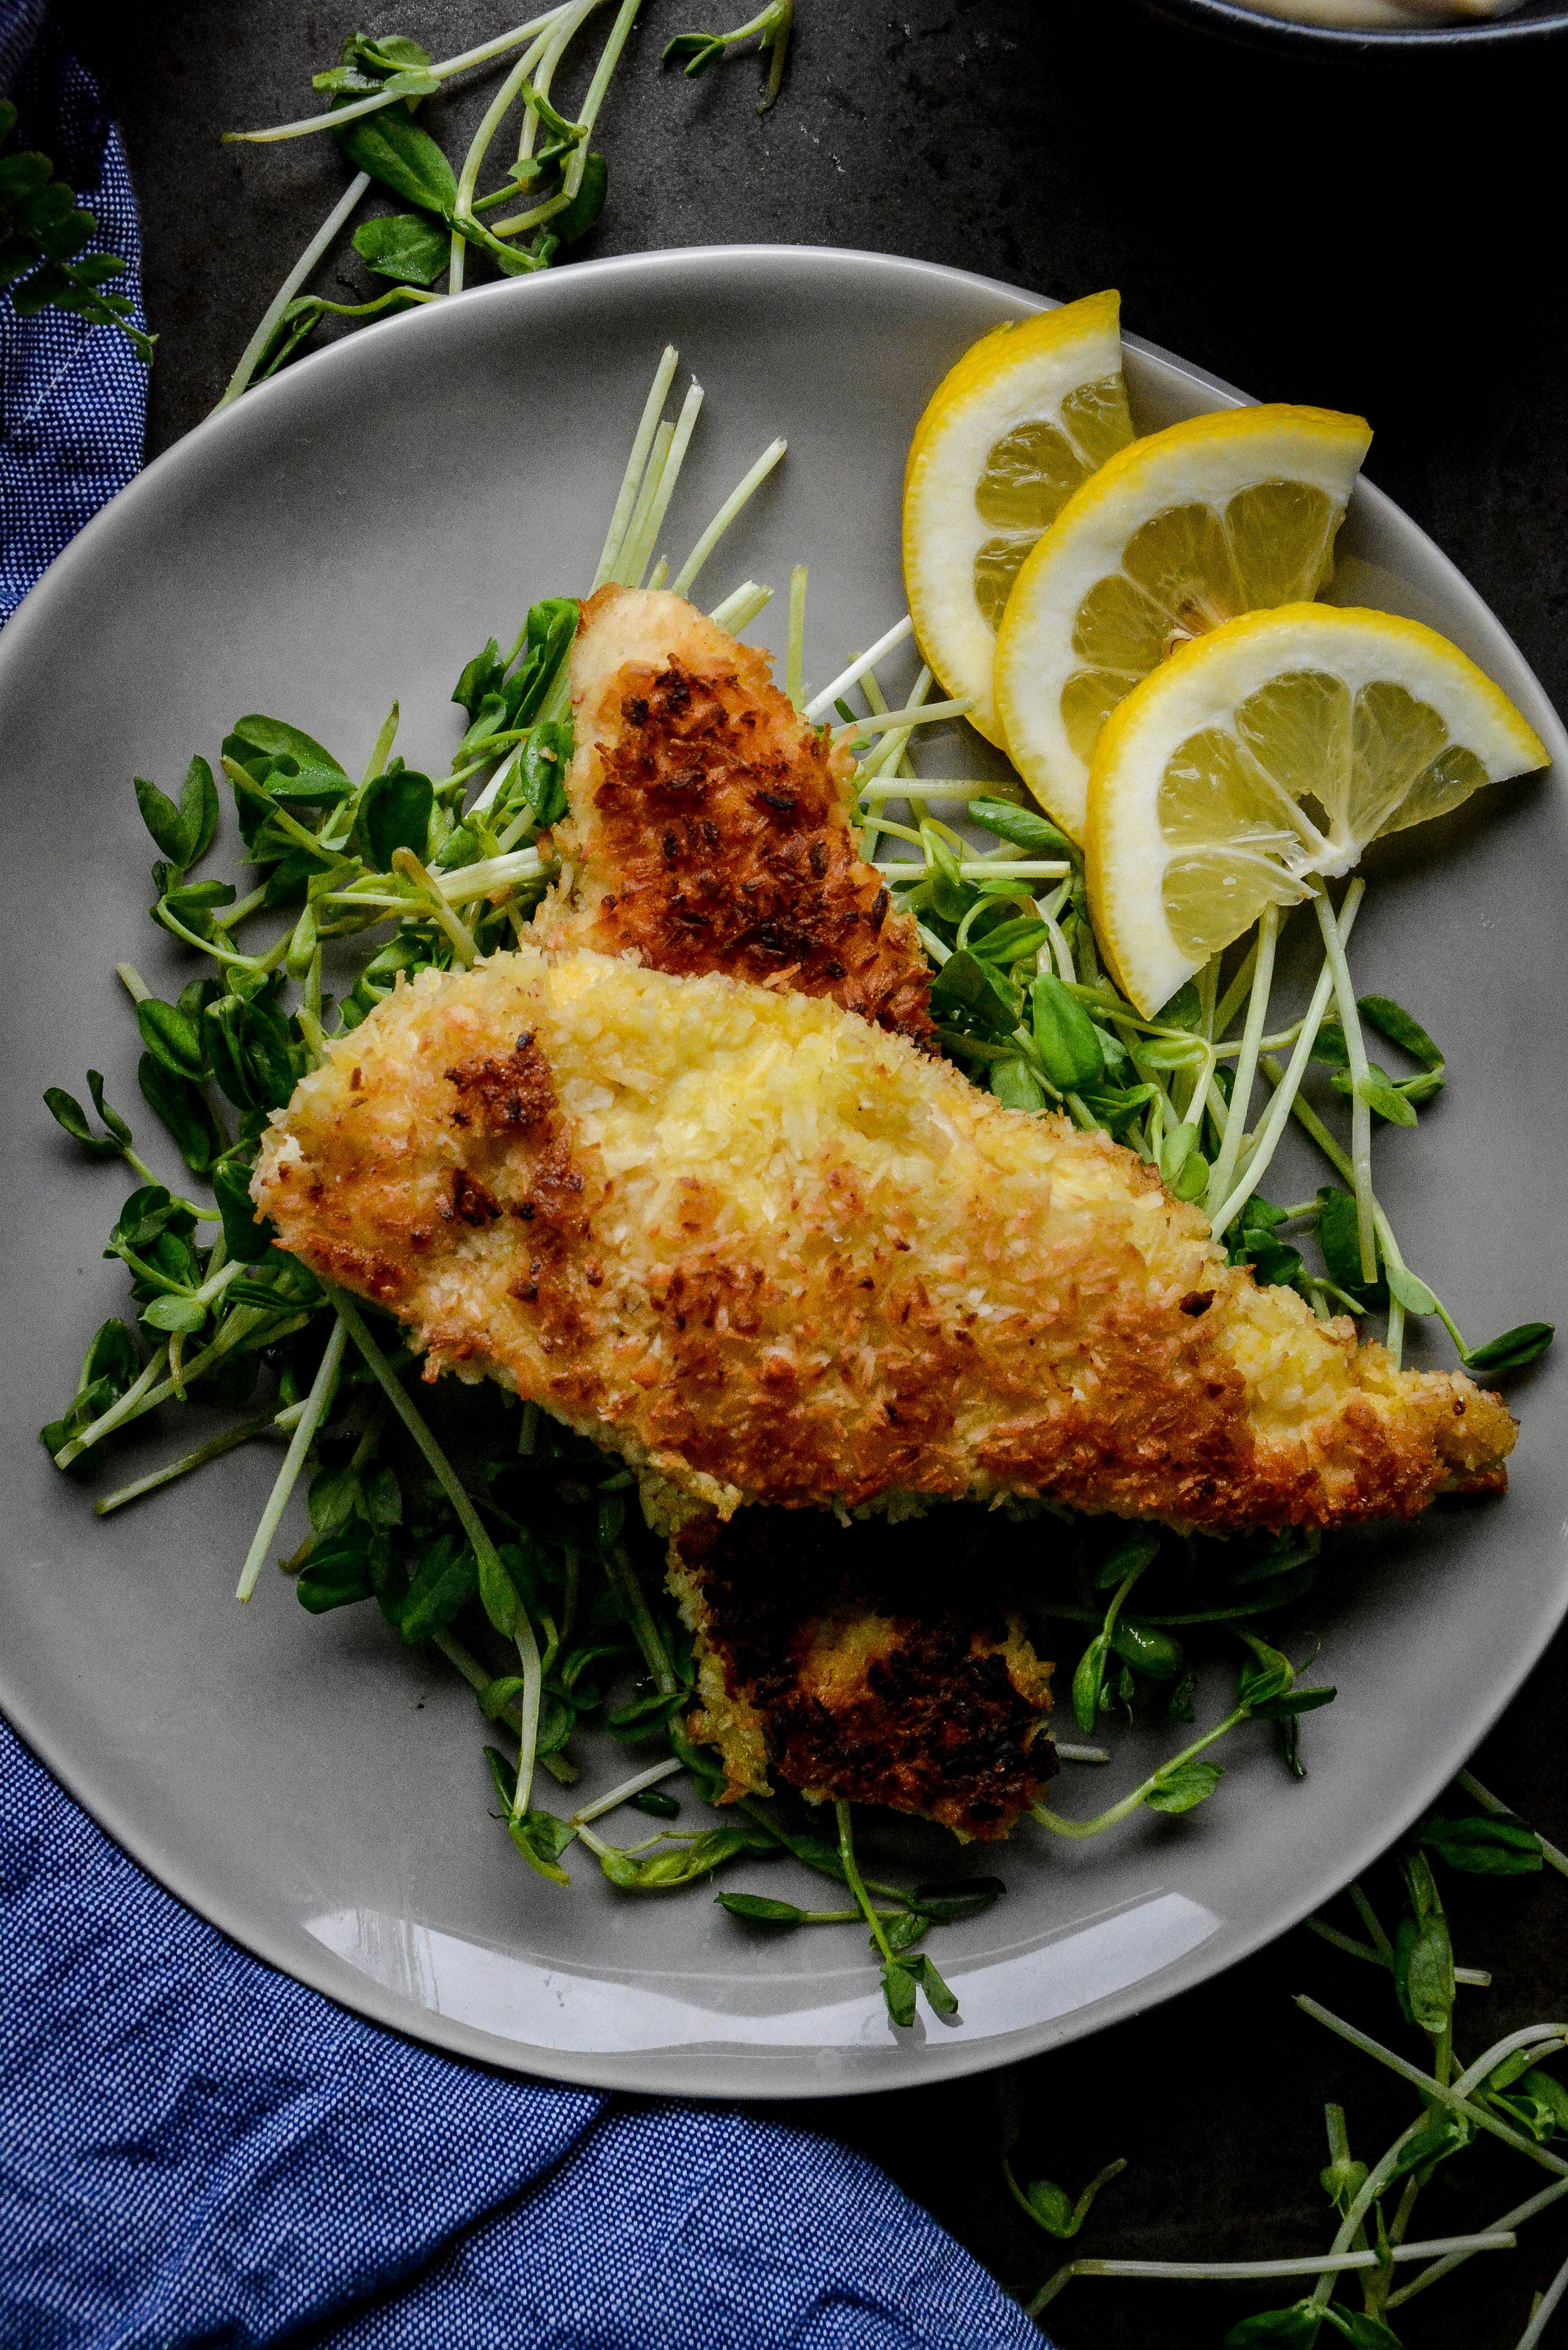  coconut crusted chicken tenders with honey mustard sauce 